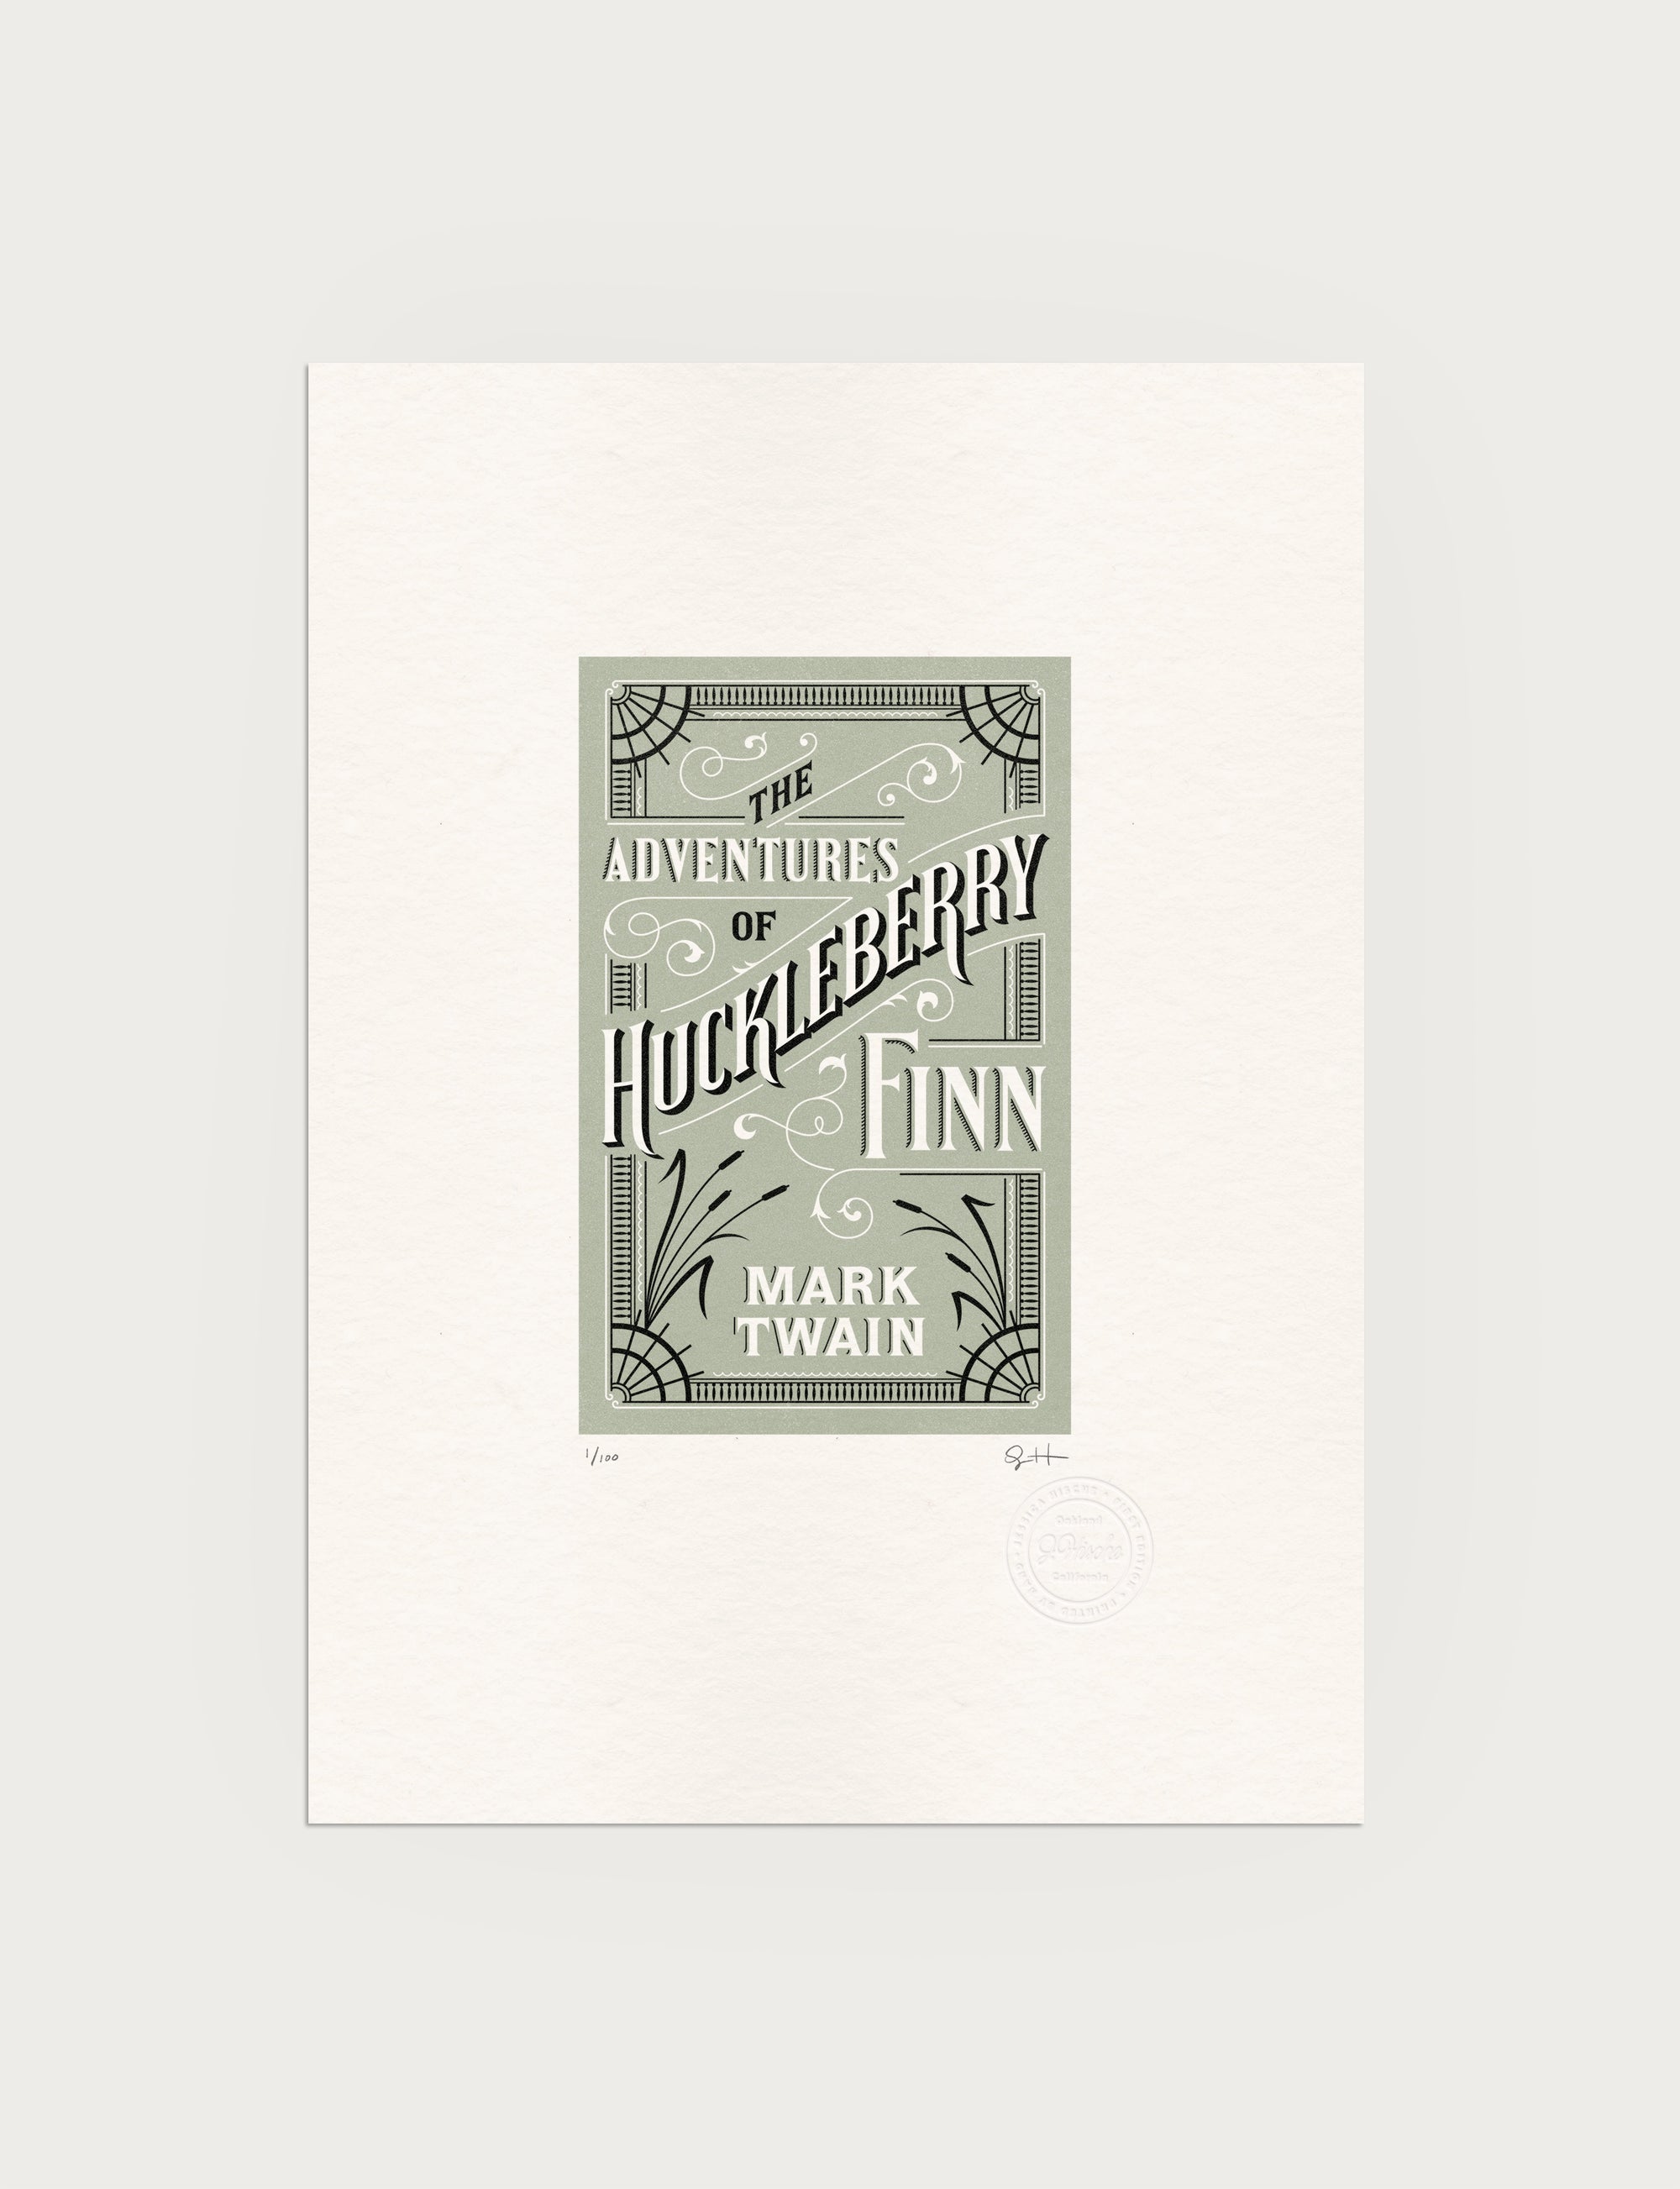 2-color letterpress print in green and black. Printed artwork is an illustrated book cover of The Adventures of Huckleberry Finn including custom hand lettering.